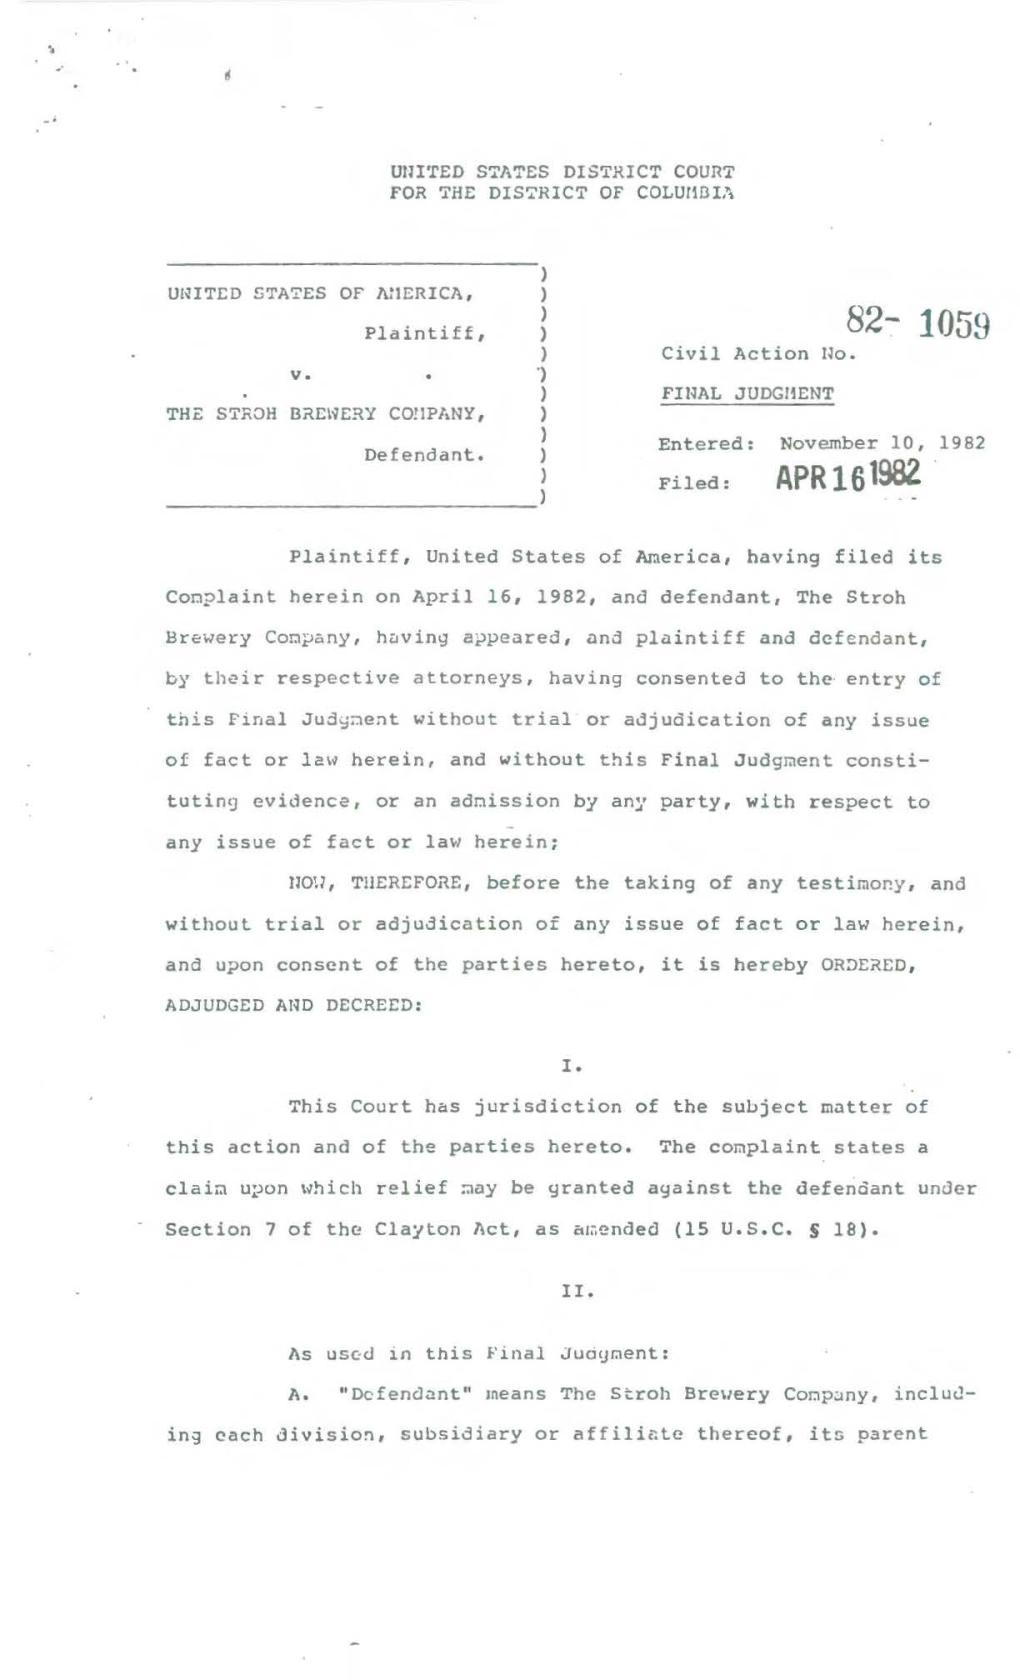 Final Judgment: U.S. V. the Stroh Brewery Company